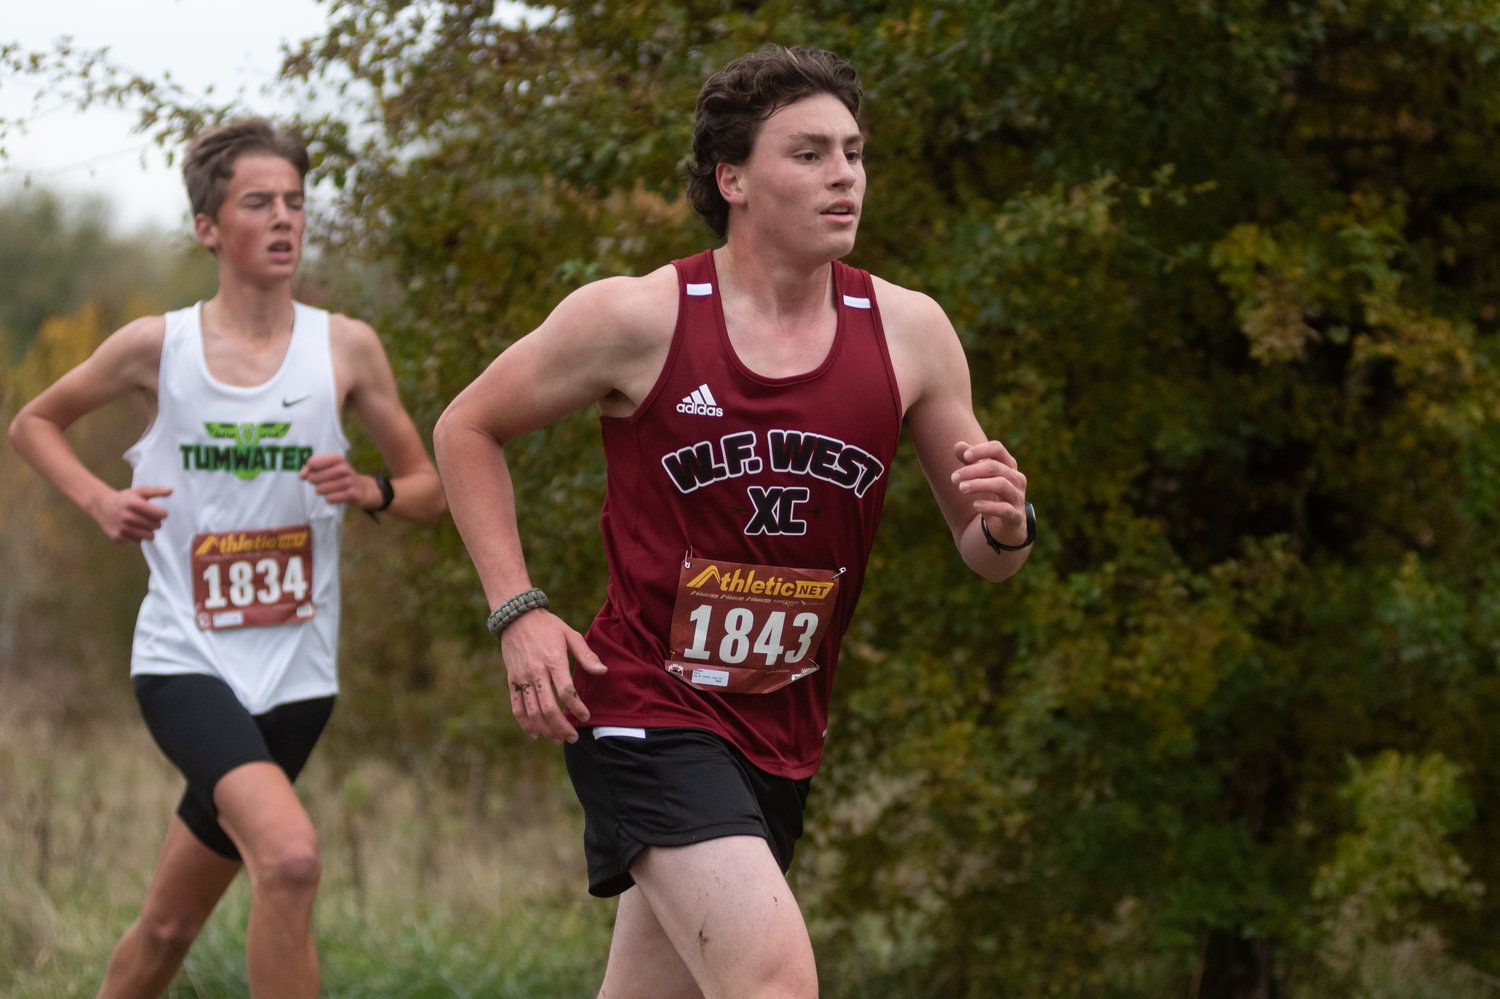 A W.F. West runner gets ahead of a Tumwater runner at the 2A Evergreen Championships at Pioneer Park Oct. 20.